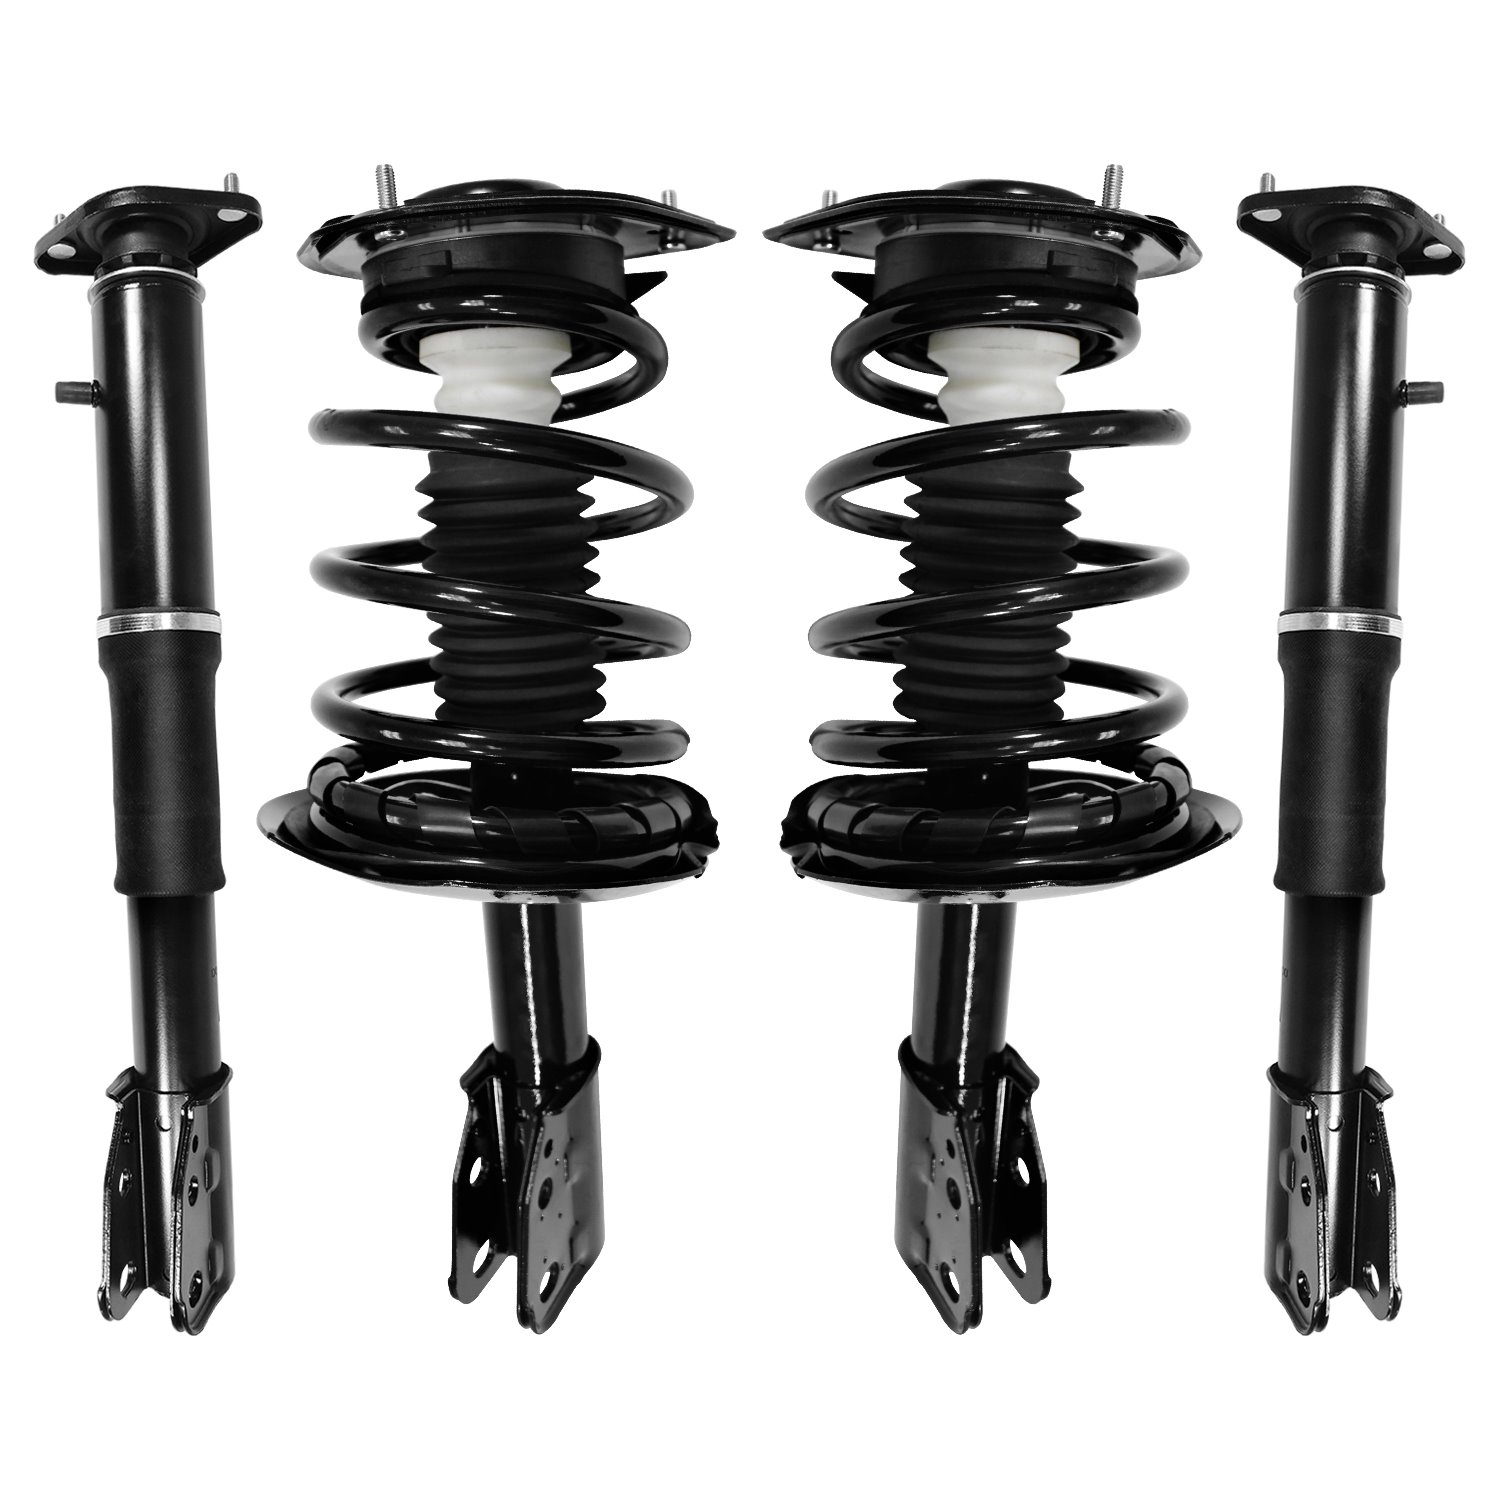 4-11040-15300-001 Front & Rear Suspension Strut & Coil Spring Assembly Kit Fits Select GM